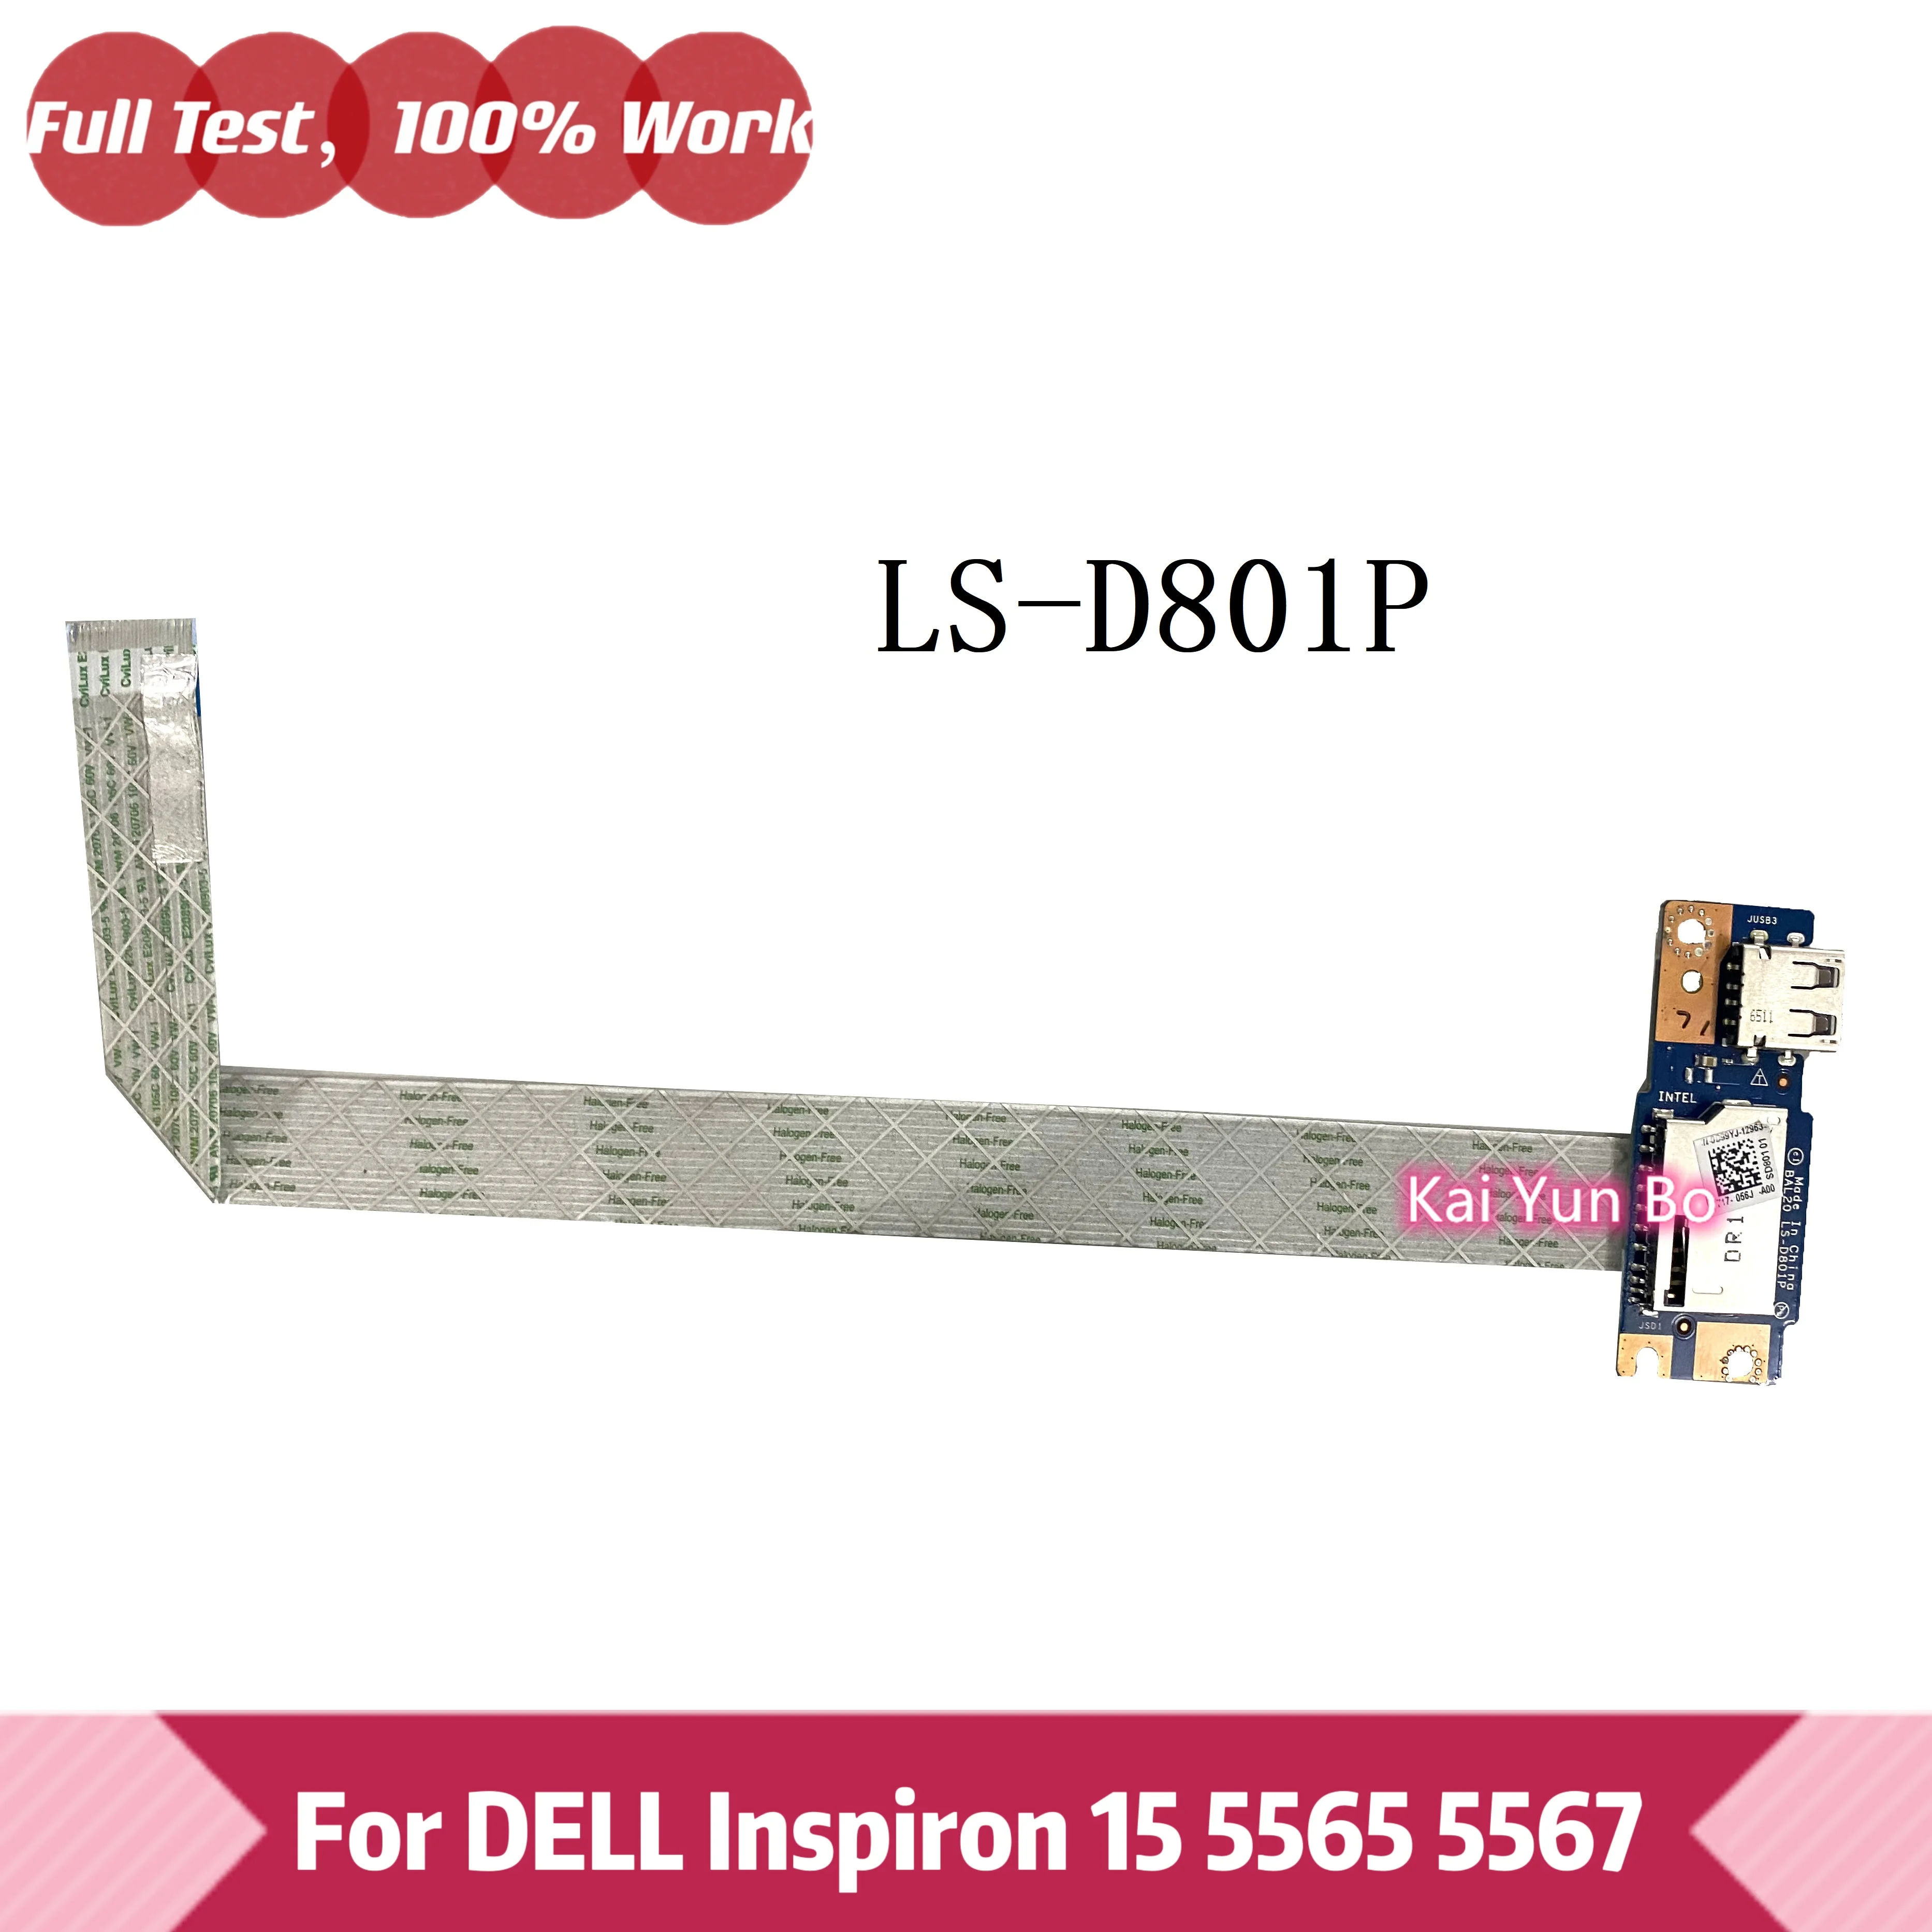 

Original For DELL Inspiron 15 5565 5567 USB board Card Reader SD with Cable BAL20 LS-D801P NBX0001Z200 NBX0001YX00